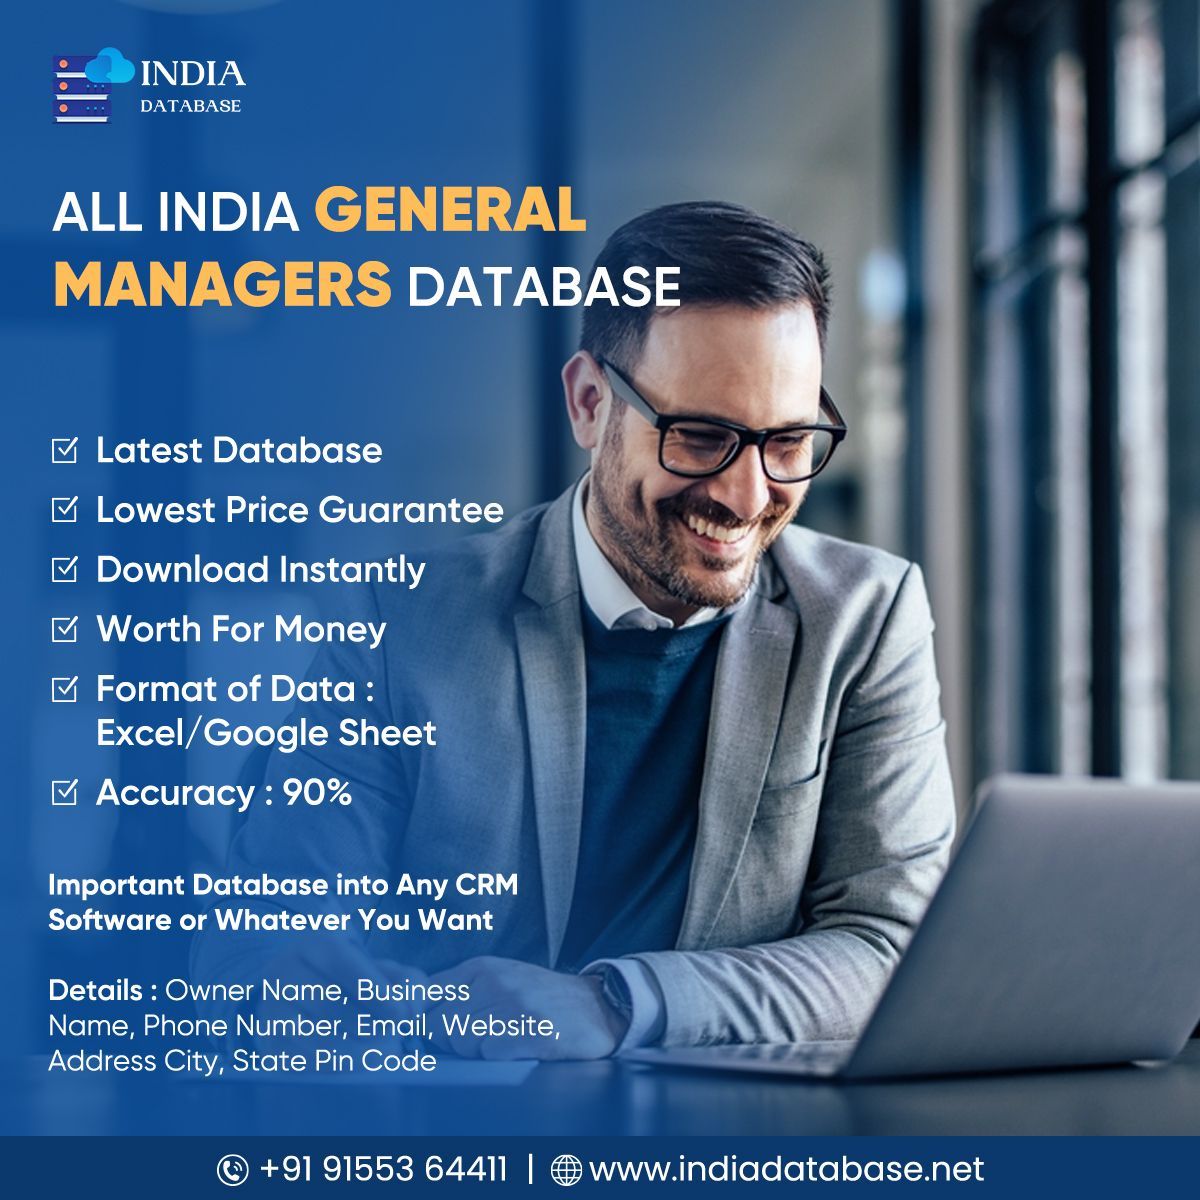 All India General Managers Database